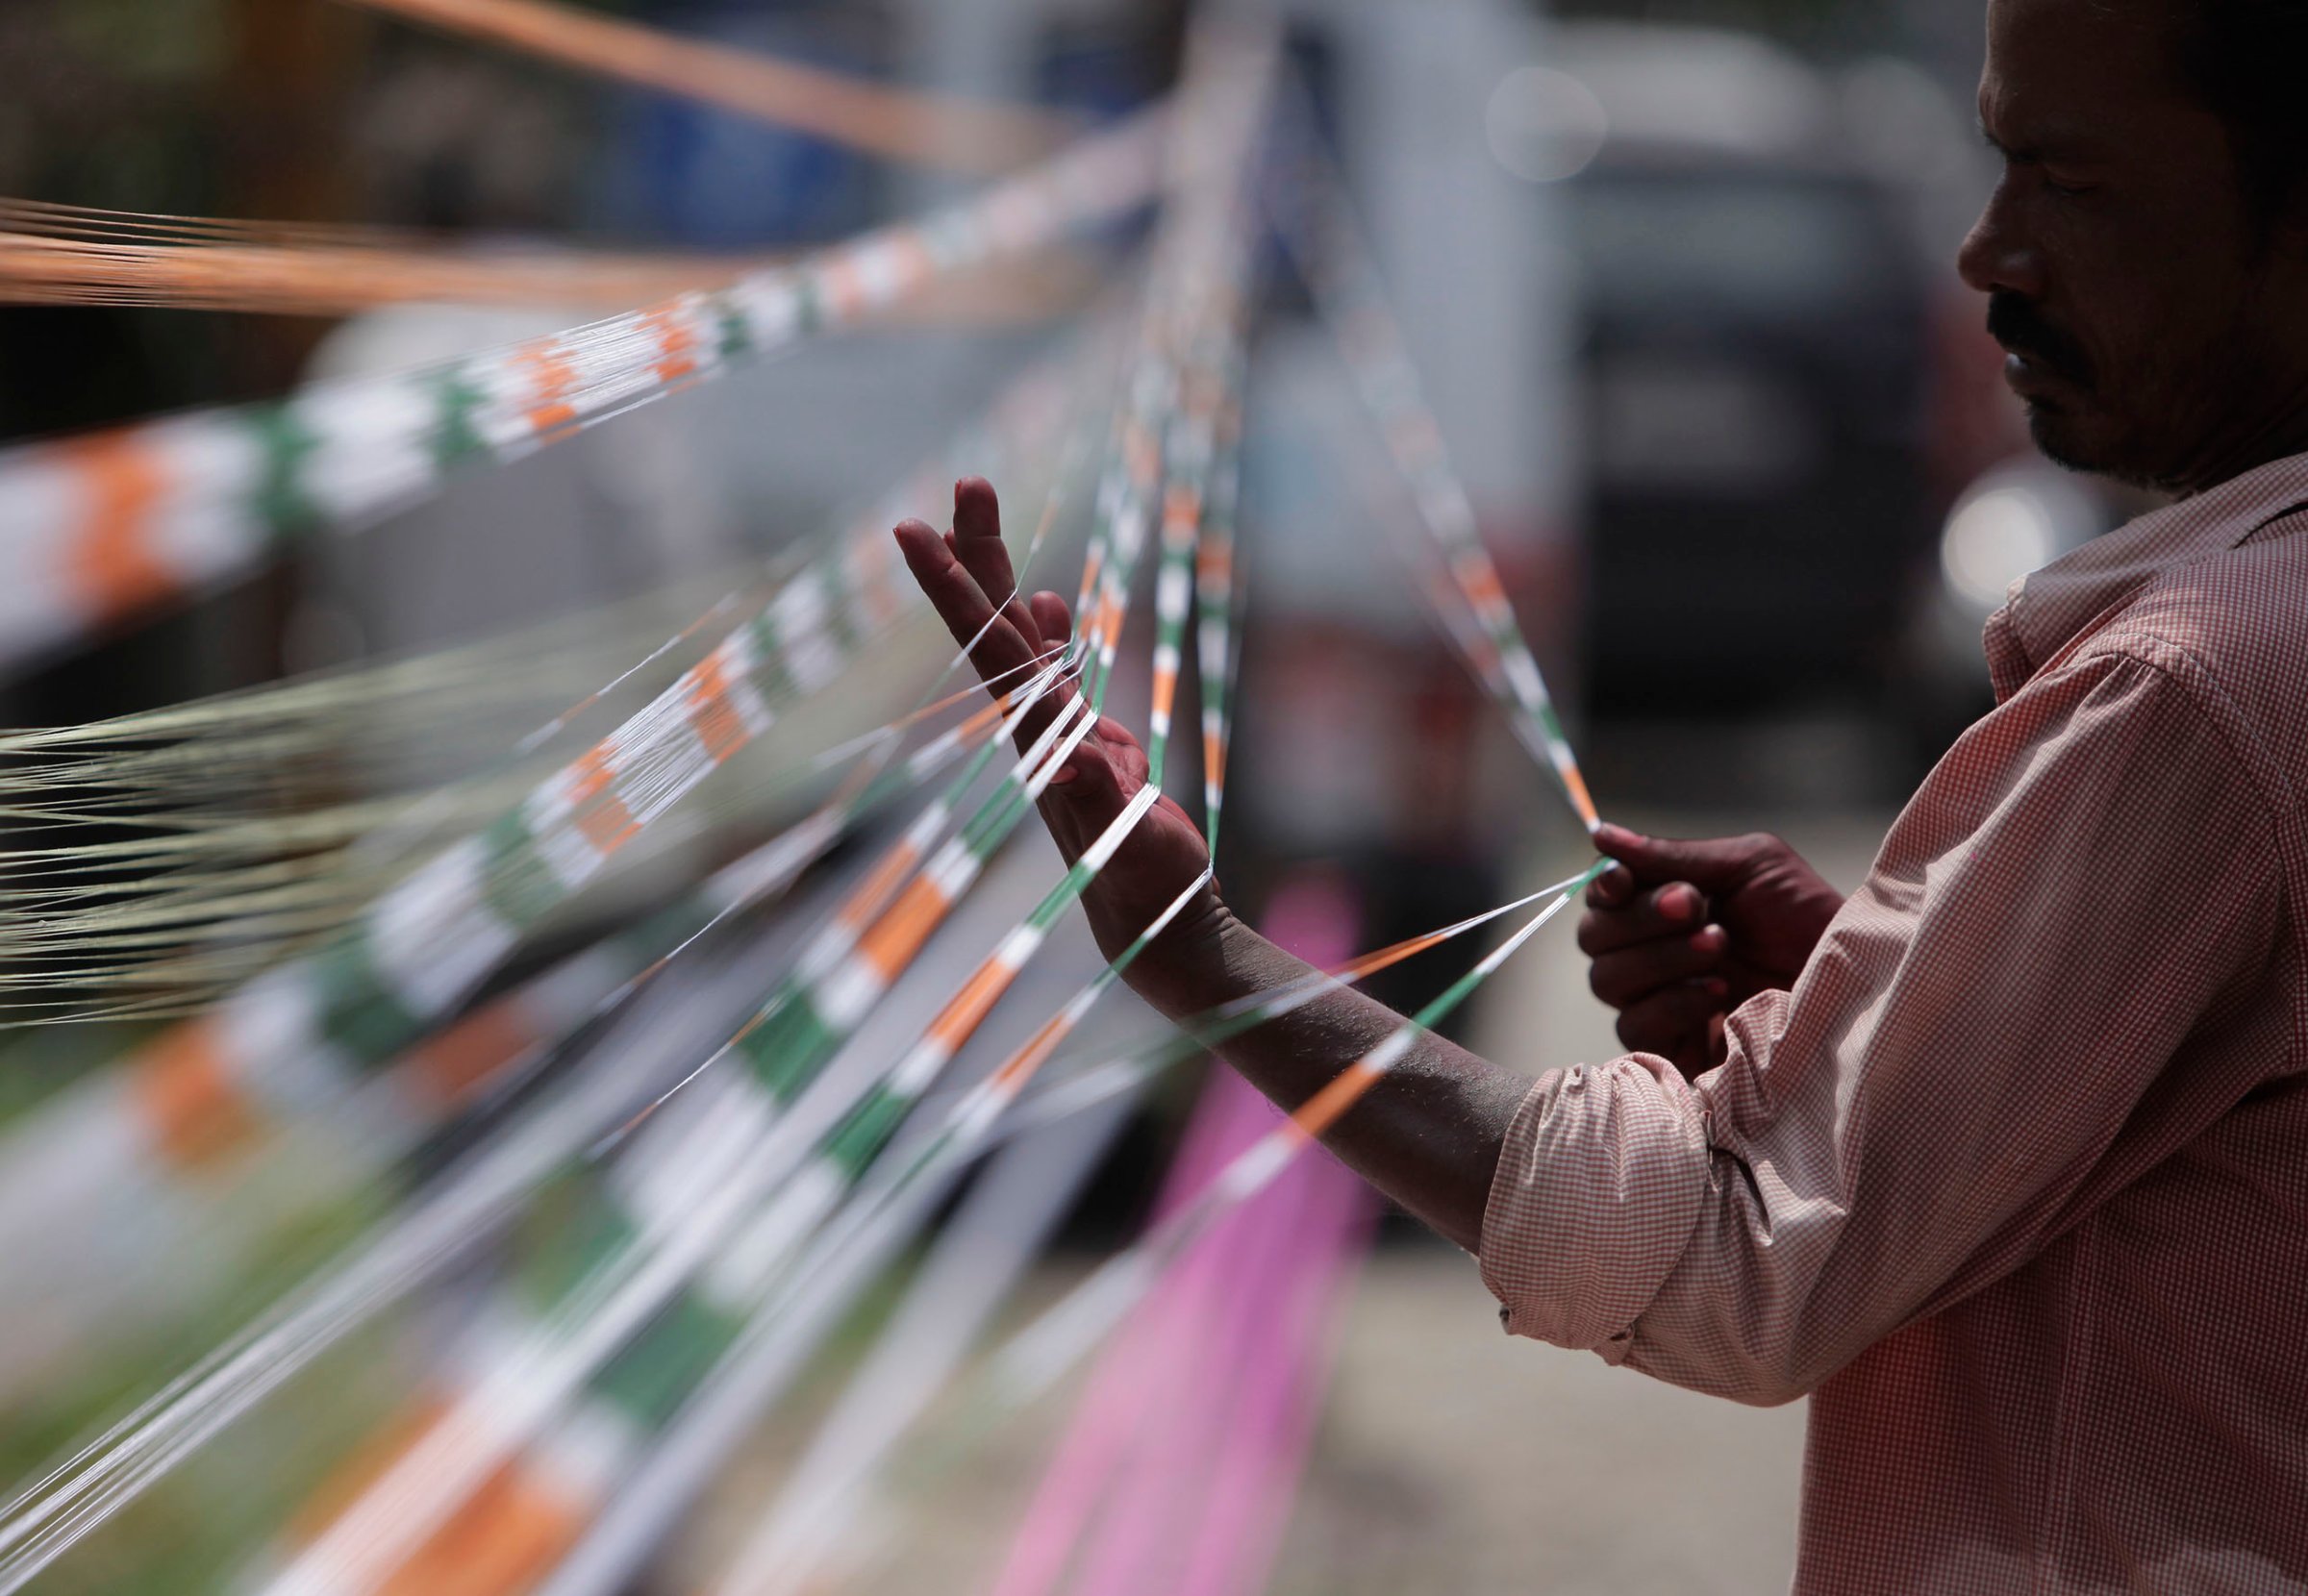 A professional thread maker prepares threads with the three colors of the Indian flag for flying kites in Jammu, India, Aug.13, 2016.